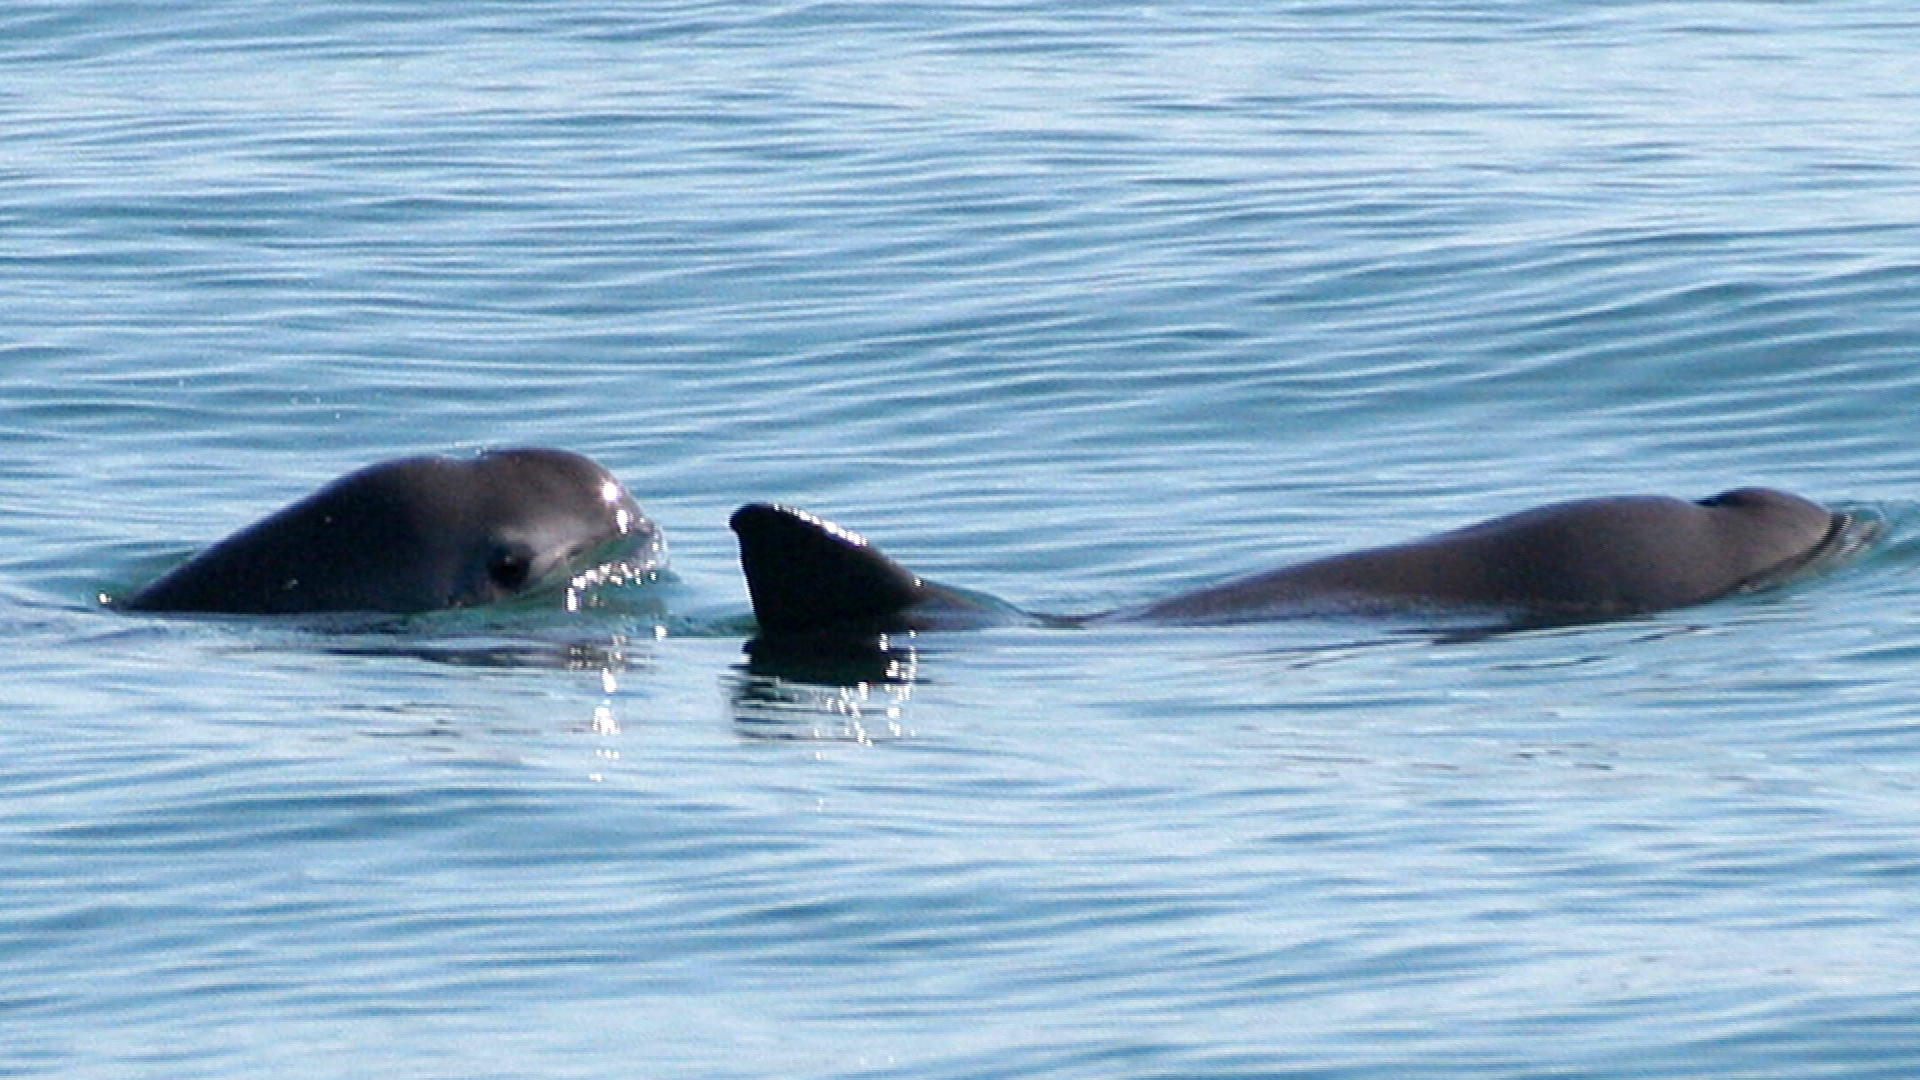 Vaquita porpoise calf captured and released in Mexico effort to save